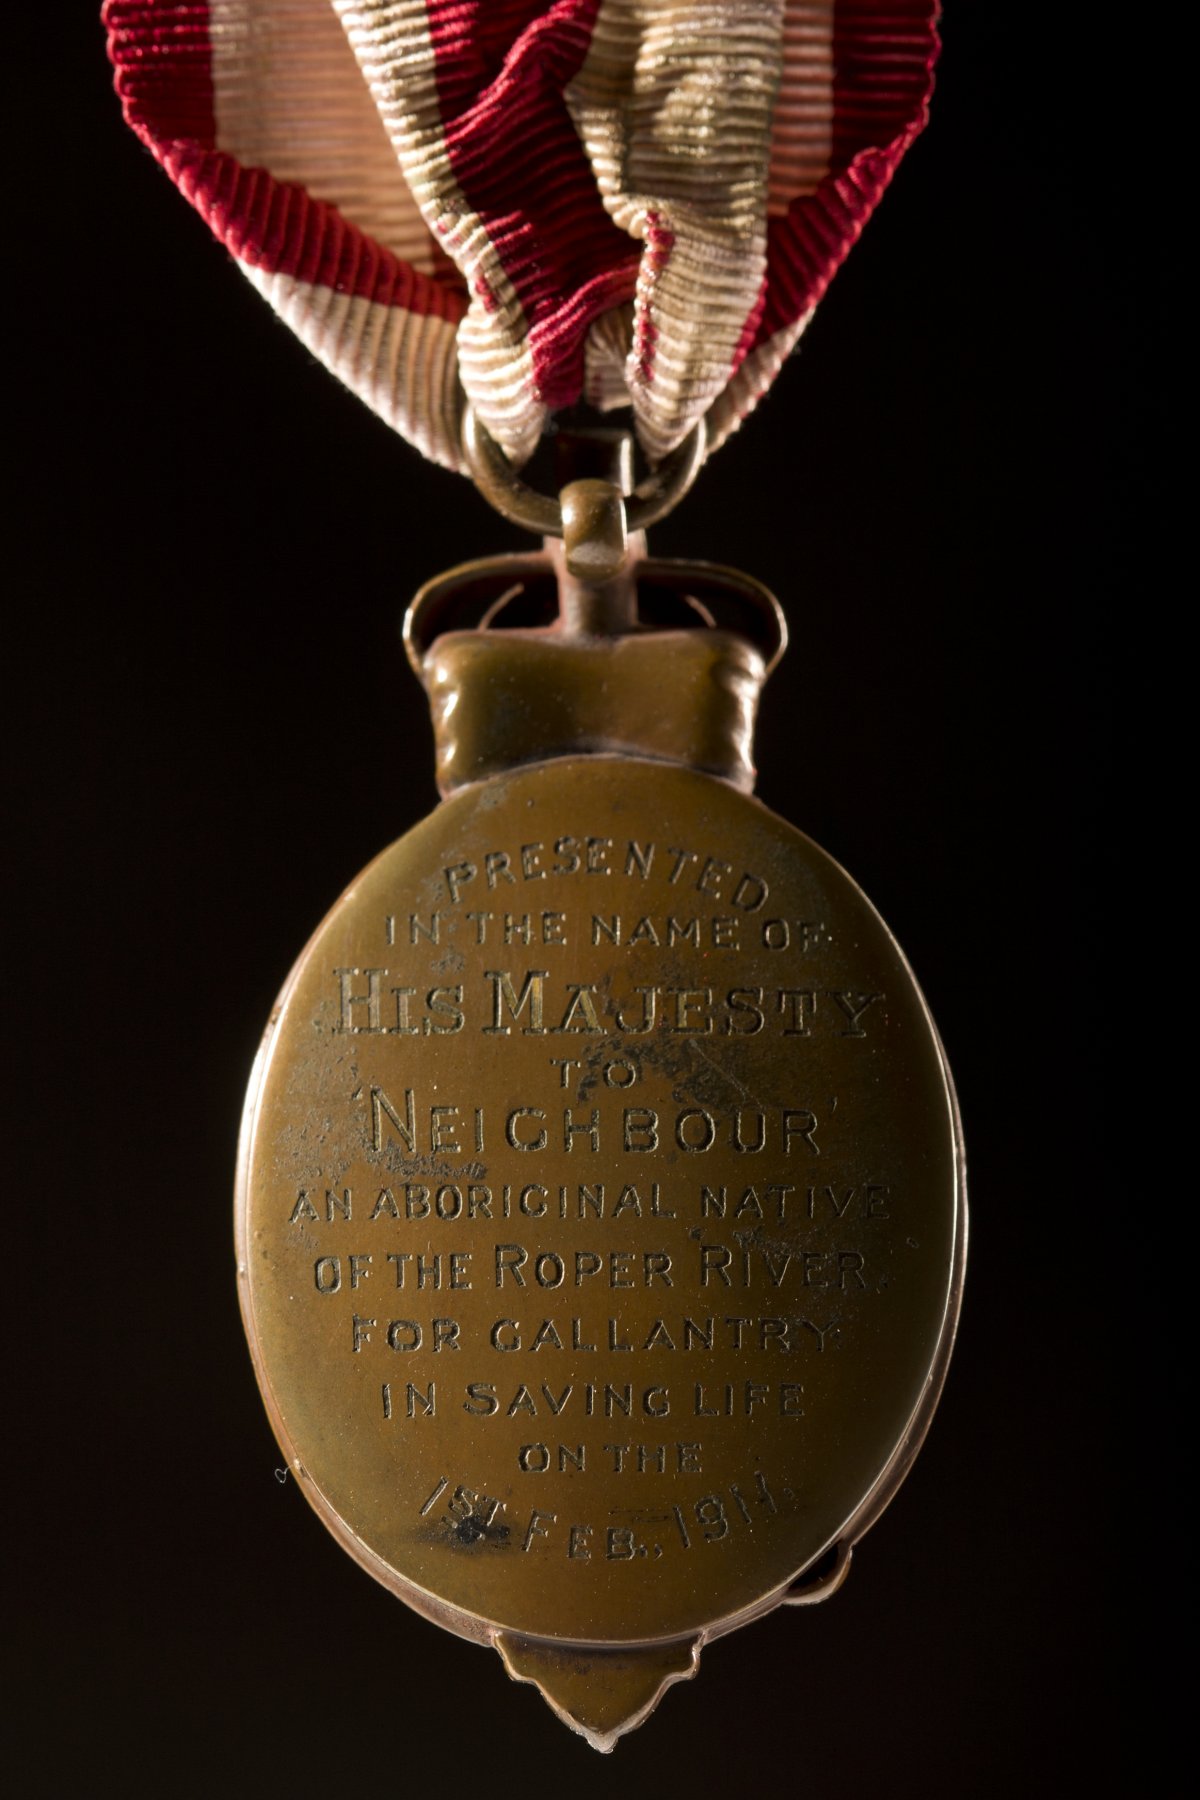 The reverse of an oval shaped bronze medal held by a red and white striped ribbon. On the back of the medal are the words " Presented in the name of His Majesty to Neighbour, an Aboriginal native of the Roper River for gallantry in saving life on the 1st Feb 1911"